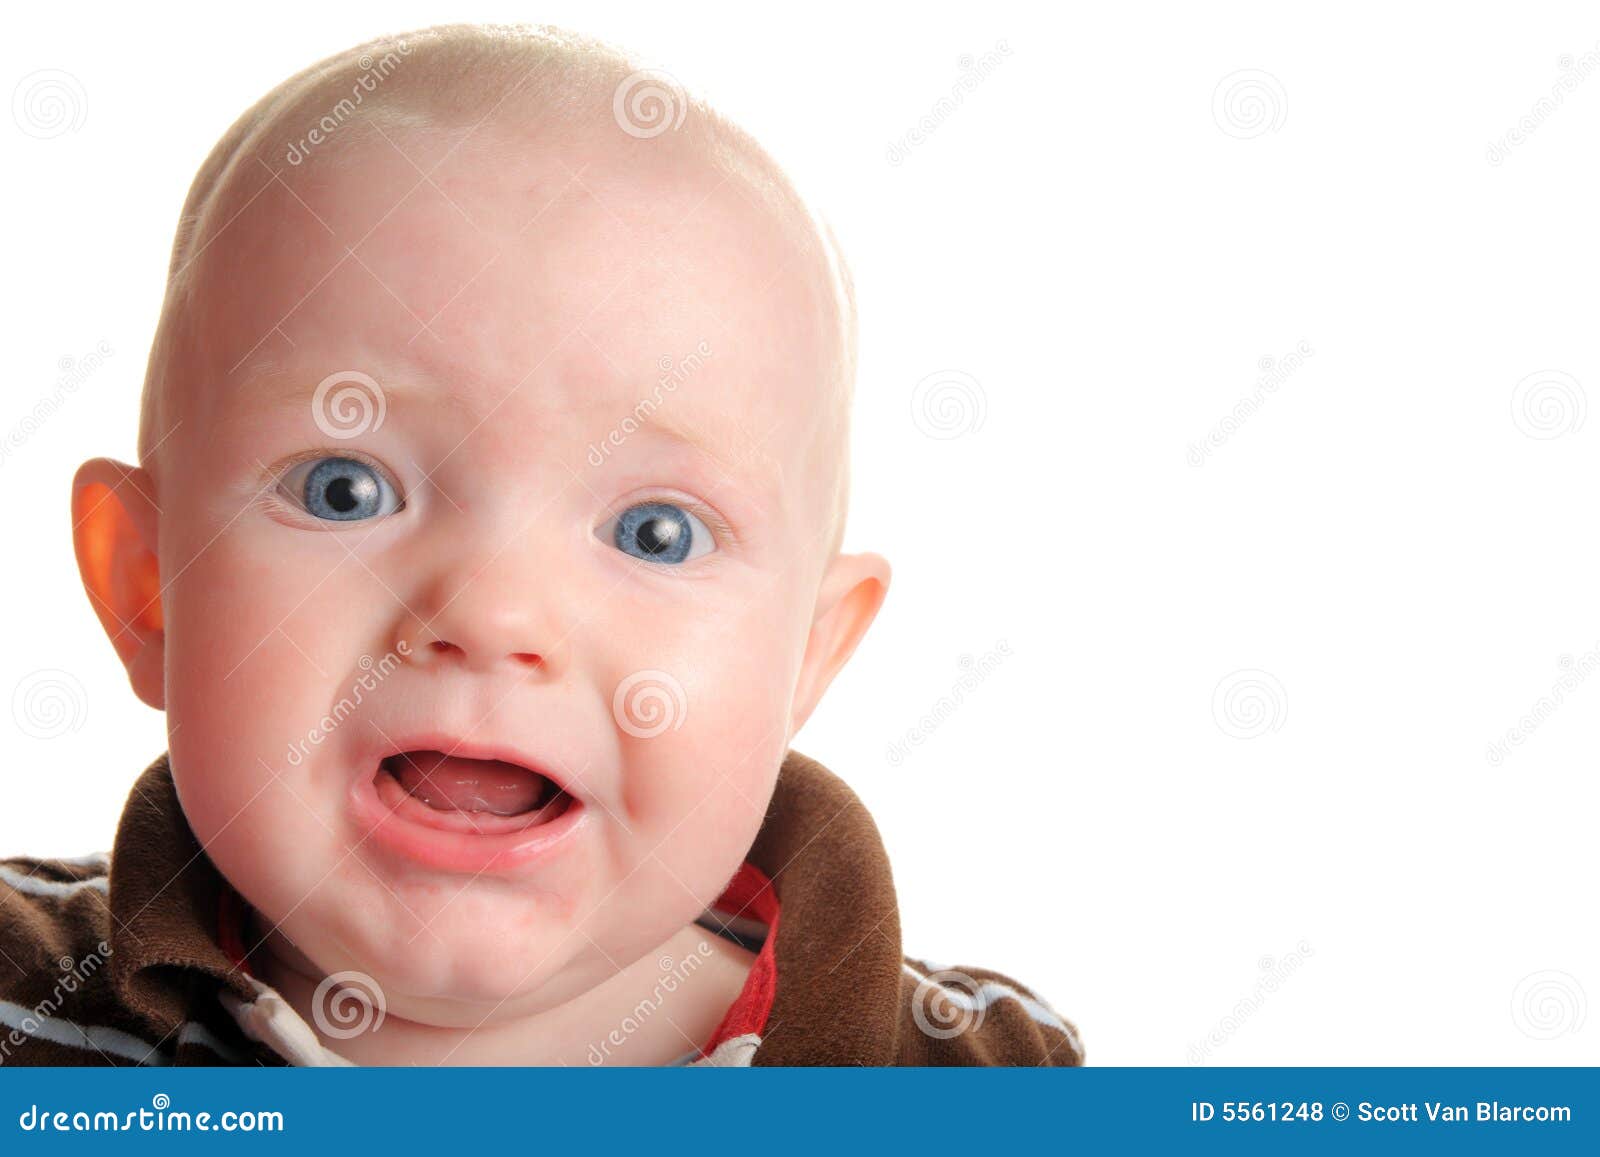 Surprised Baby Newborn Baby Portrait With Funny Shocked Face